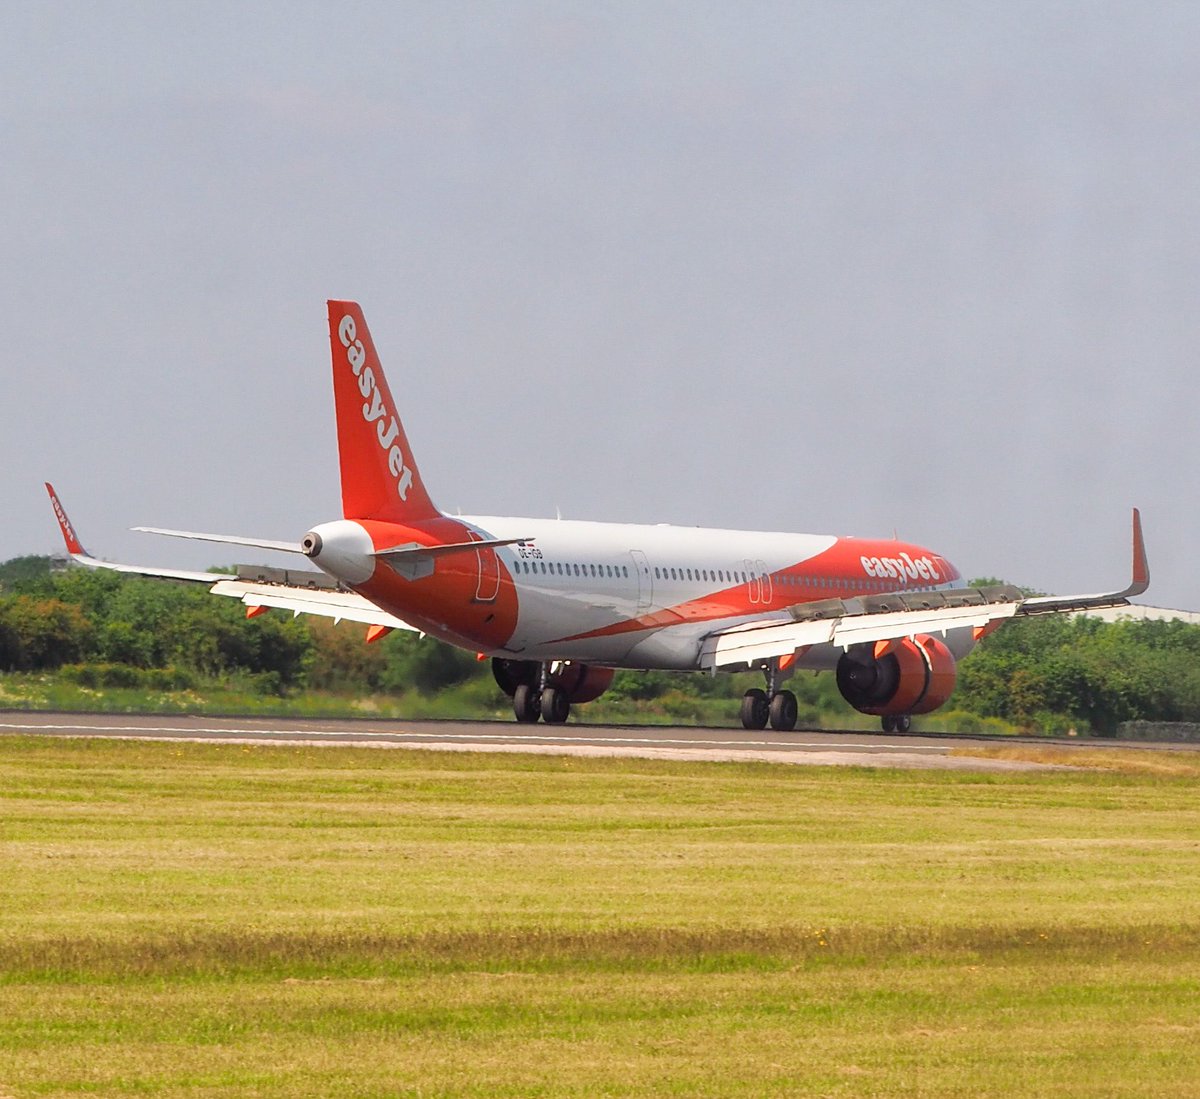 Todays post features a humongous orange Easyjet Airbus A321-251NX (OE-ISB) landing to at Manchester Airport from Milan Malpensa Airport with its spoilers and reverse thrust deployed.

#a321neo #Airbus #Aircraft #aviation #easyjet  #manchesterairport #teamairbus #travel